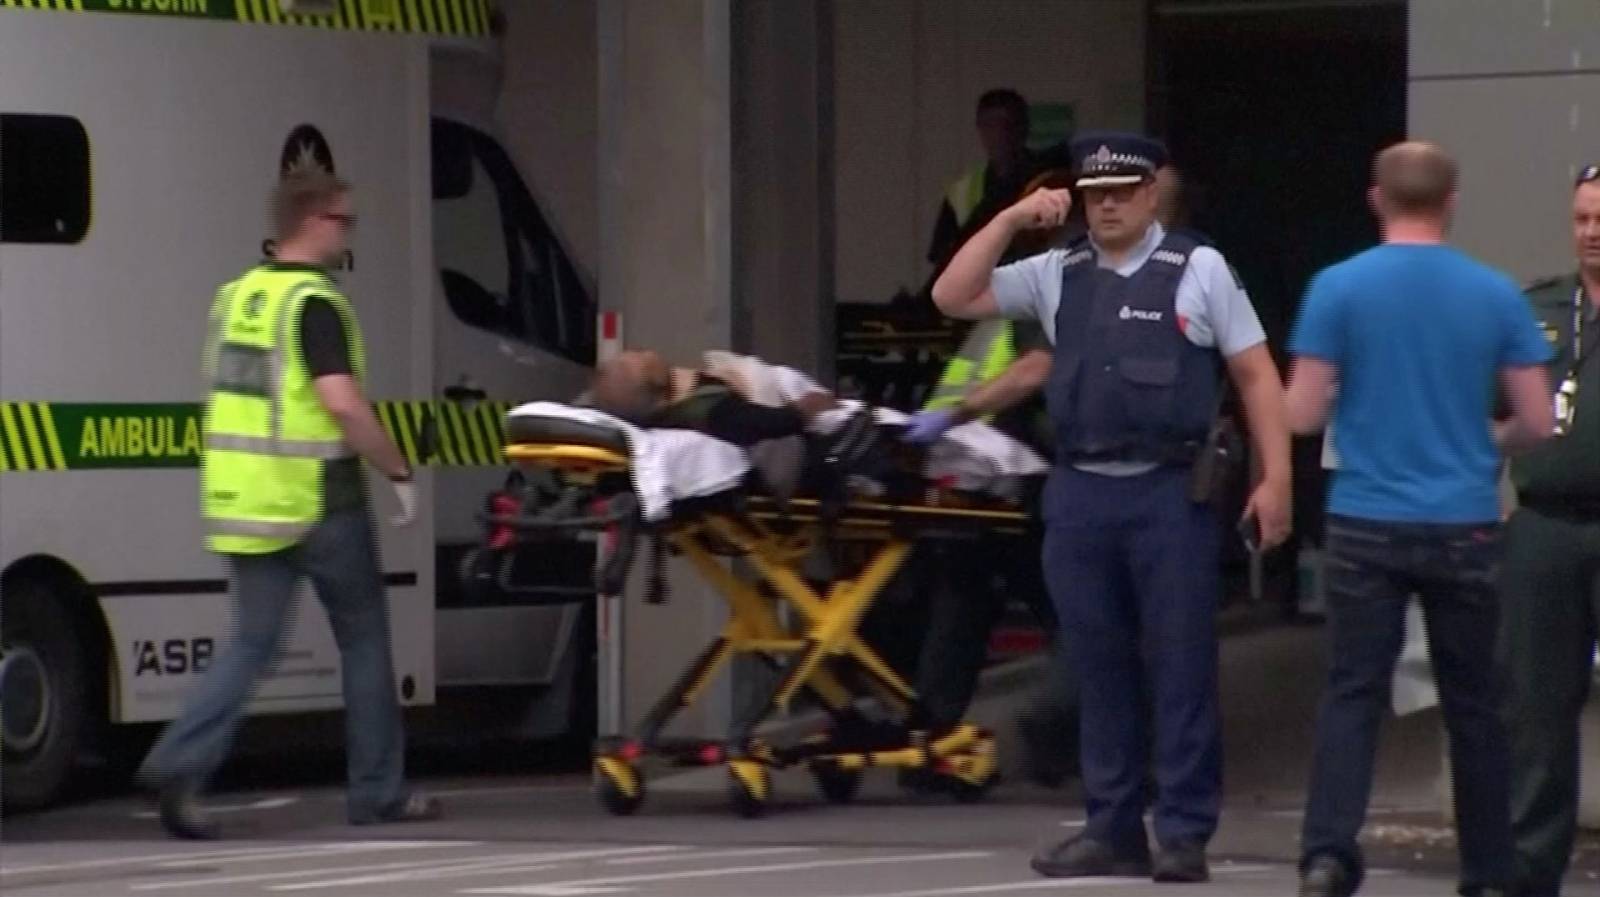 Video grab of emergency services personnel transport a stretcher carrying a person at a hospital, after reports that several shots had been fired, in central Christchurch